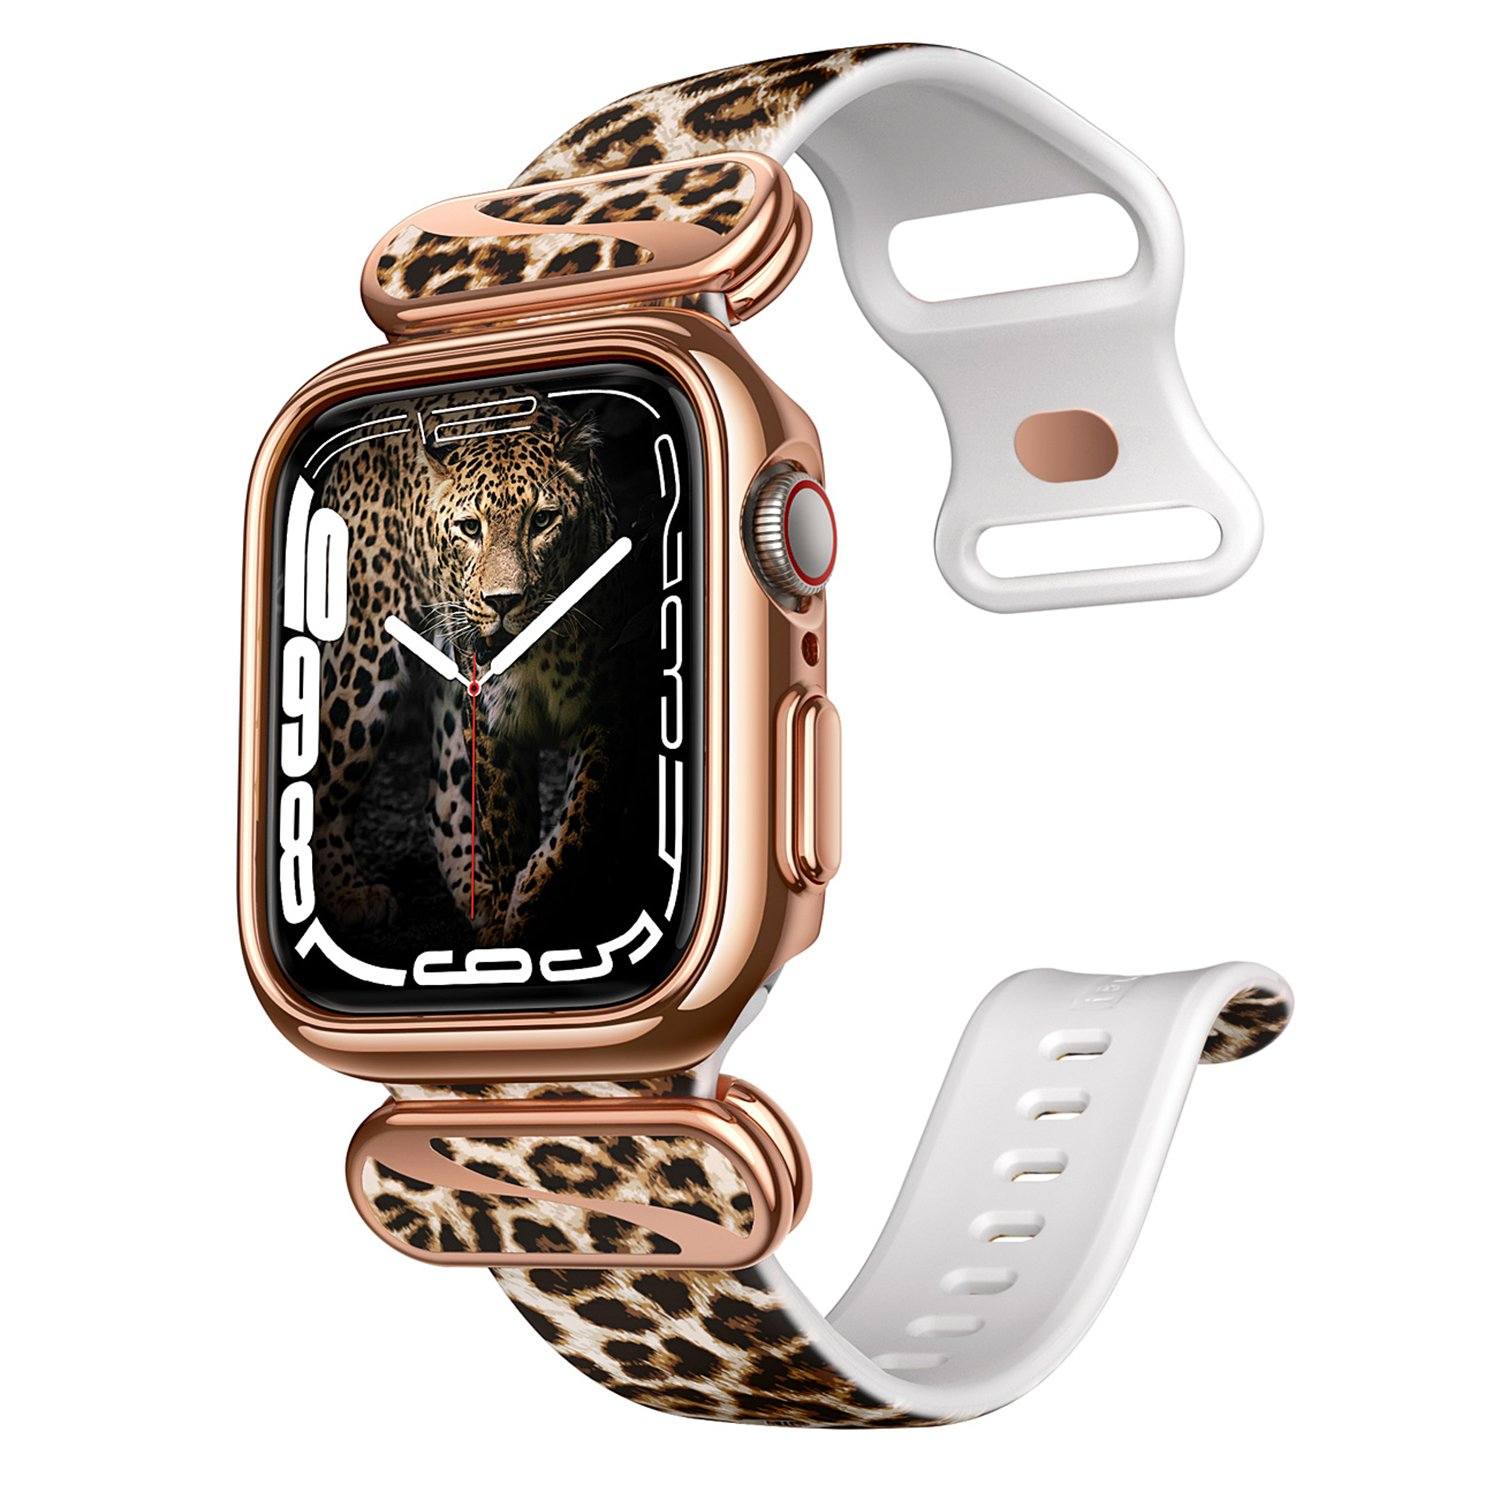 i-Blason Cosmo Stylish Sporty Protective Bumper Case with Adjustable Strap Bands for Apple Watch Series 7/6/SE/5/4 (40mm/41mm) Default i-Blason Jungle 